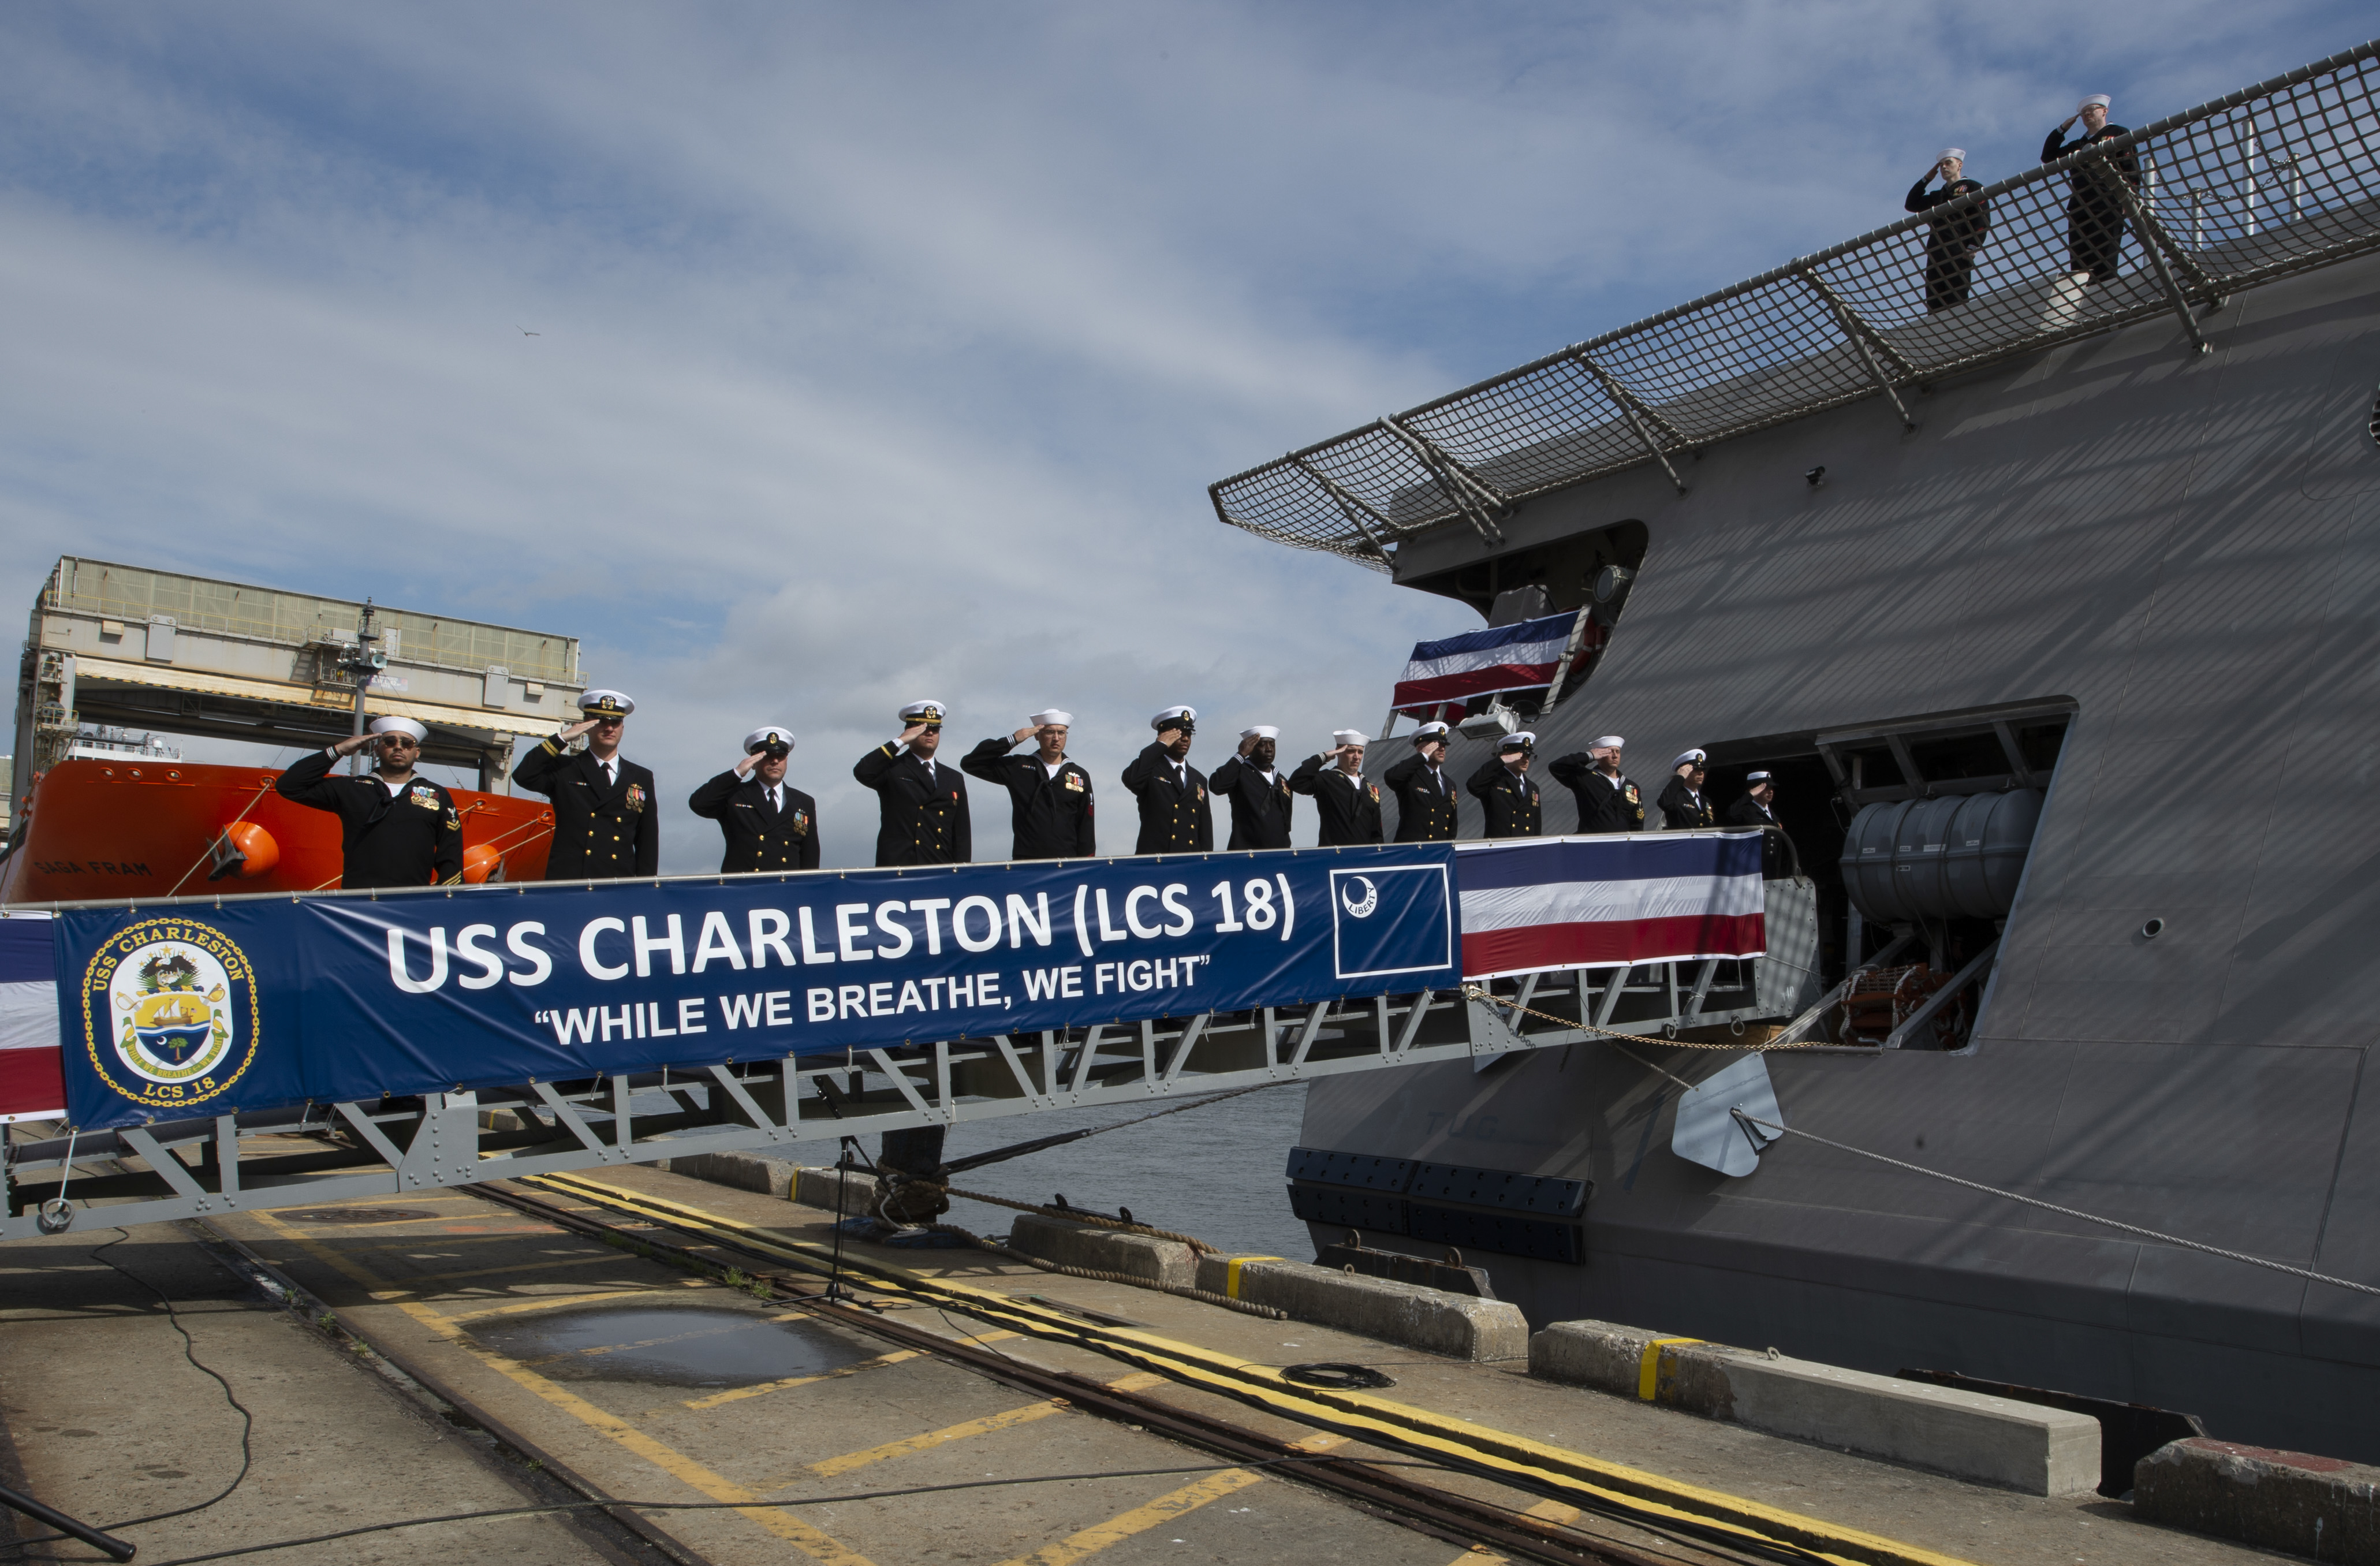  Commissioning of the USS Charleston The crew of the Navy’s newest littoral combat ship, USS Charleston, brings the ship to life during its commissioning ceremony on Saturday in Charleston, S.C. The Charleston is the 16th littoral combat ship to enter the fleet and the ninth of the Independence variant. The ship will transit to join Littoral Combat Ship Squadron 1 and 10 other littoral combat ships currently homeported at Naval Base San Diego. (U.S. Navy photo by Mass Communication Specialist 2nd Class Natalia Murillo/Released)